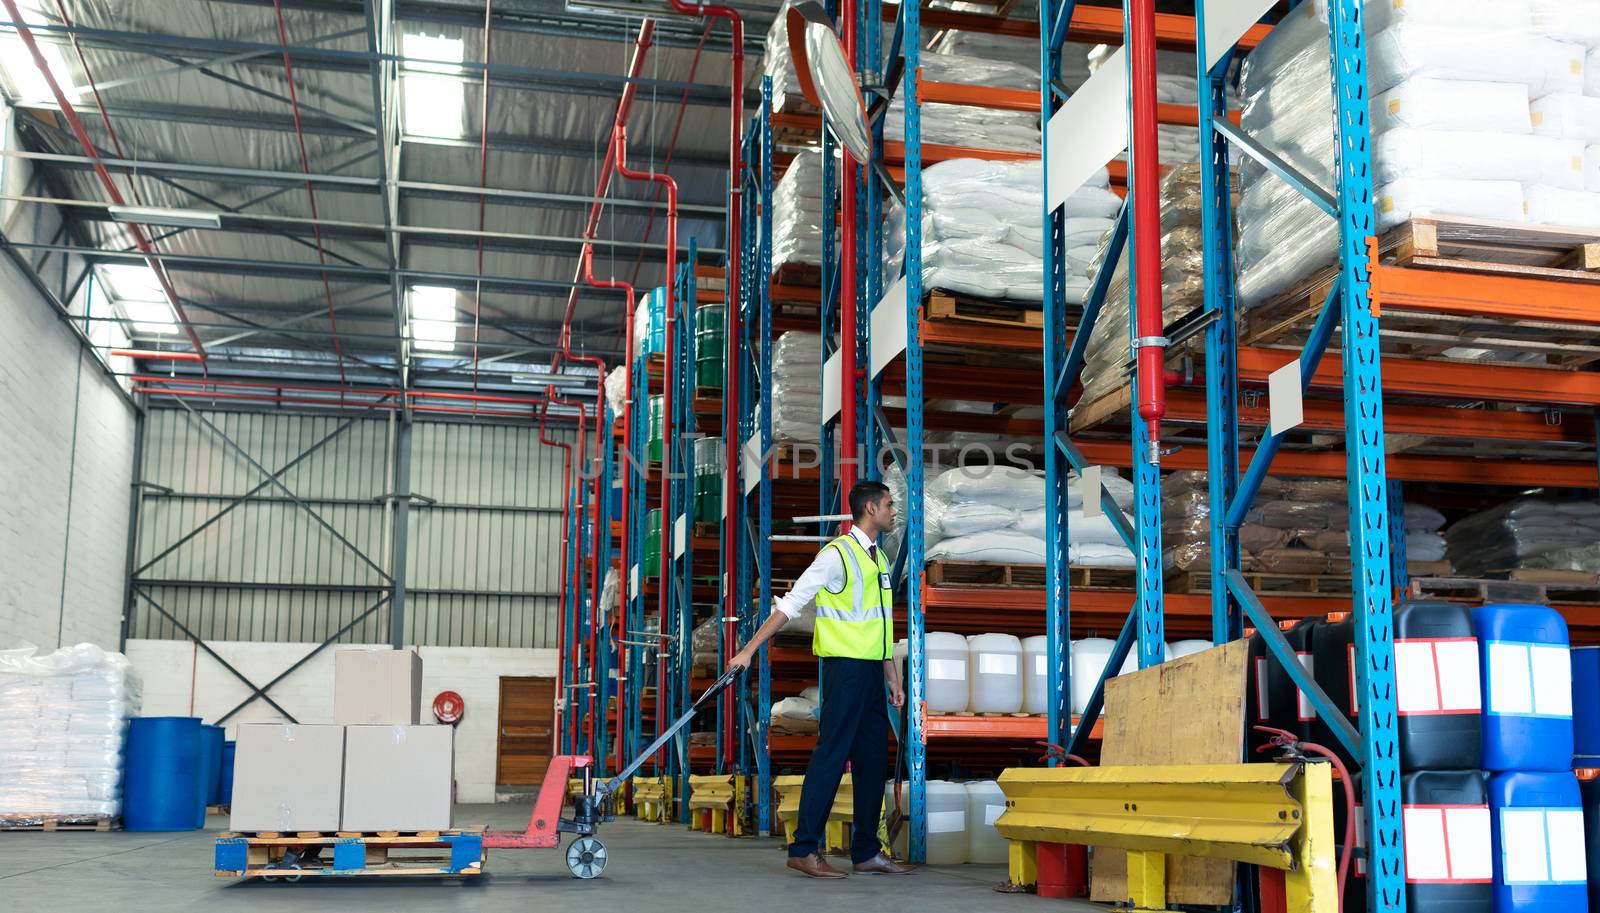 Side view of Young Caucasian male staff using pallet jack in warehouse. This is a freight transportation and distribution warehouse. Industrial and industrial workers concept